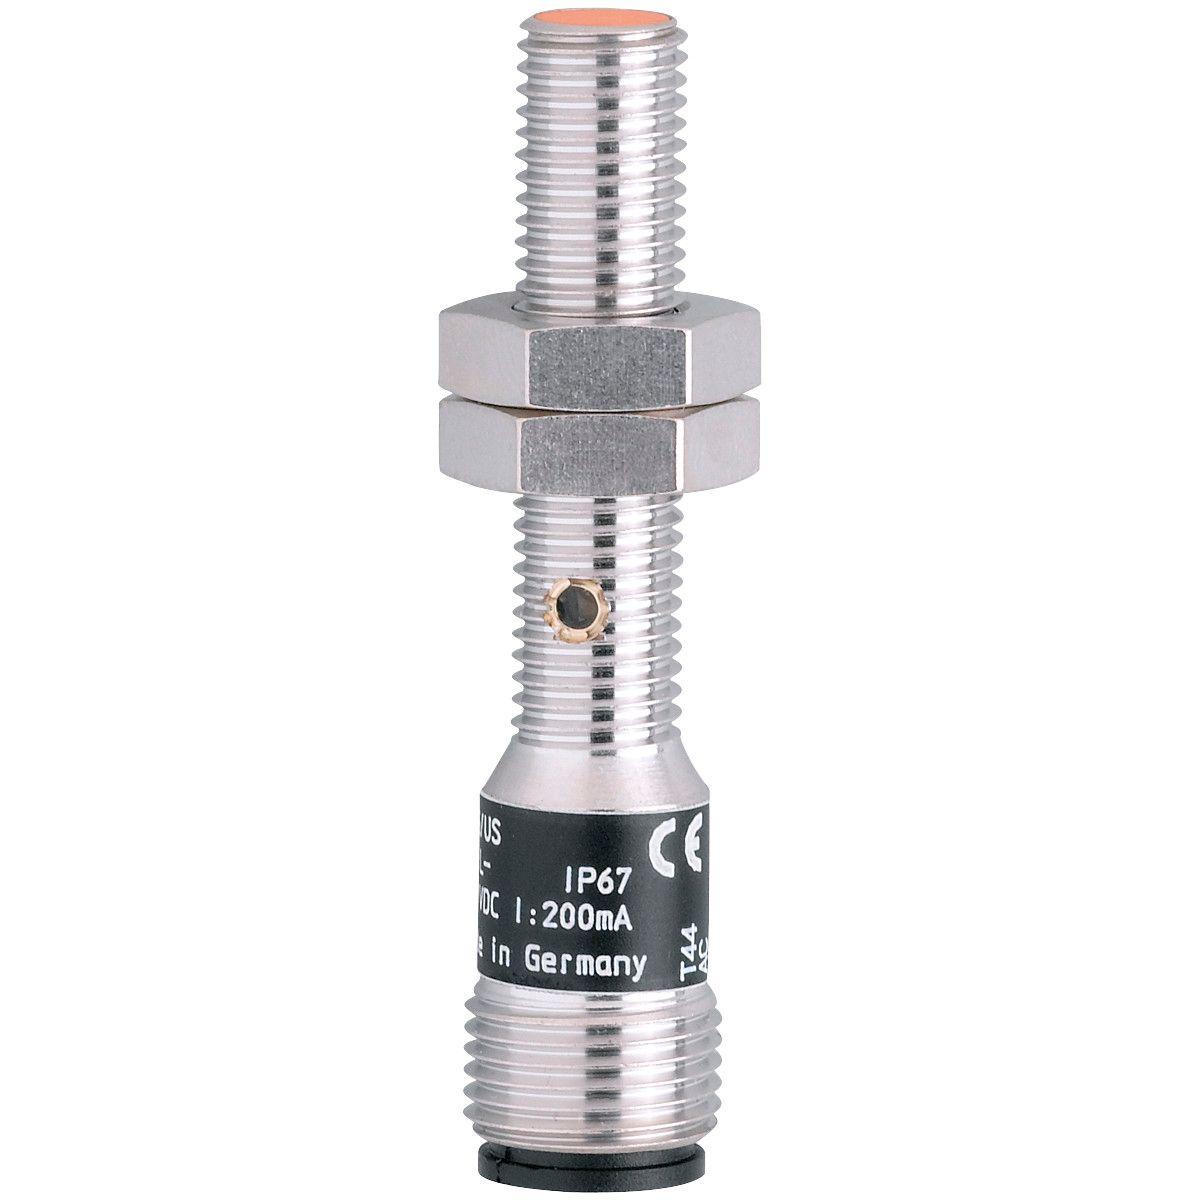 ifm Electronic IE5090 Inductive sensor, Electrical design: PNP, Output function: normally open, Sensing range [mm]: 1, Housing: Threaded type, Dimensions [mm]: M8 x 1 / L = 53